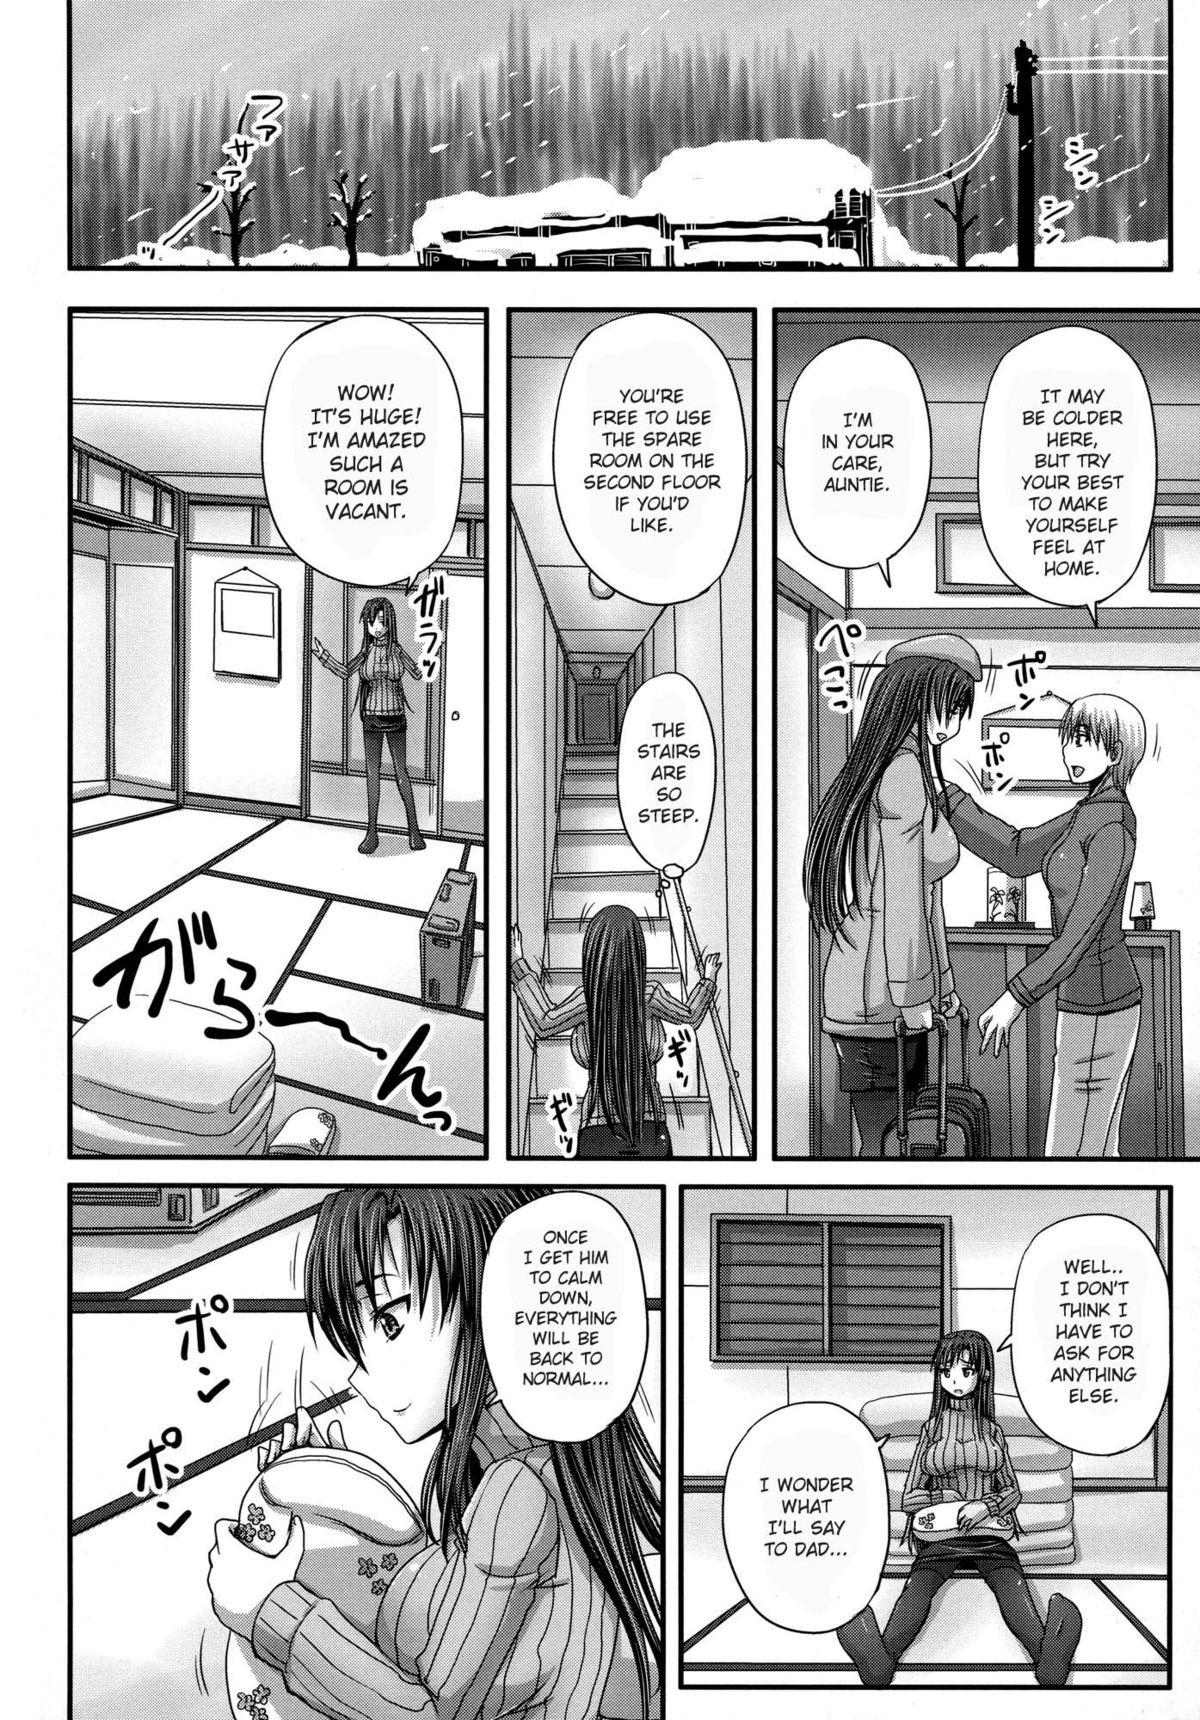 [Akigami Satoru] Tsukurou! Onaho Ane - Let's made a Sex Sleeve from Sister Ch. 1-2 [English] [snowshoes] 63